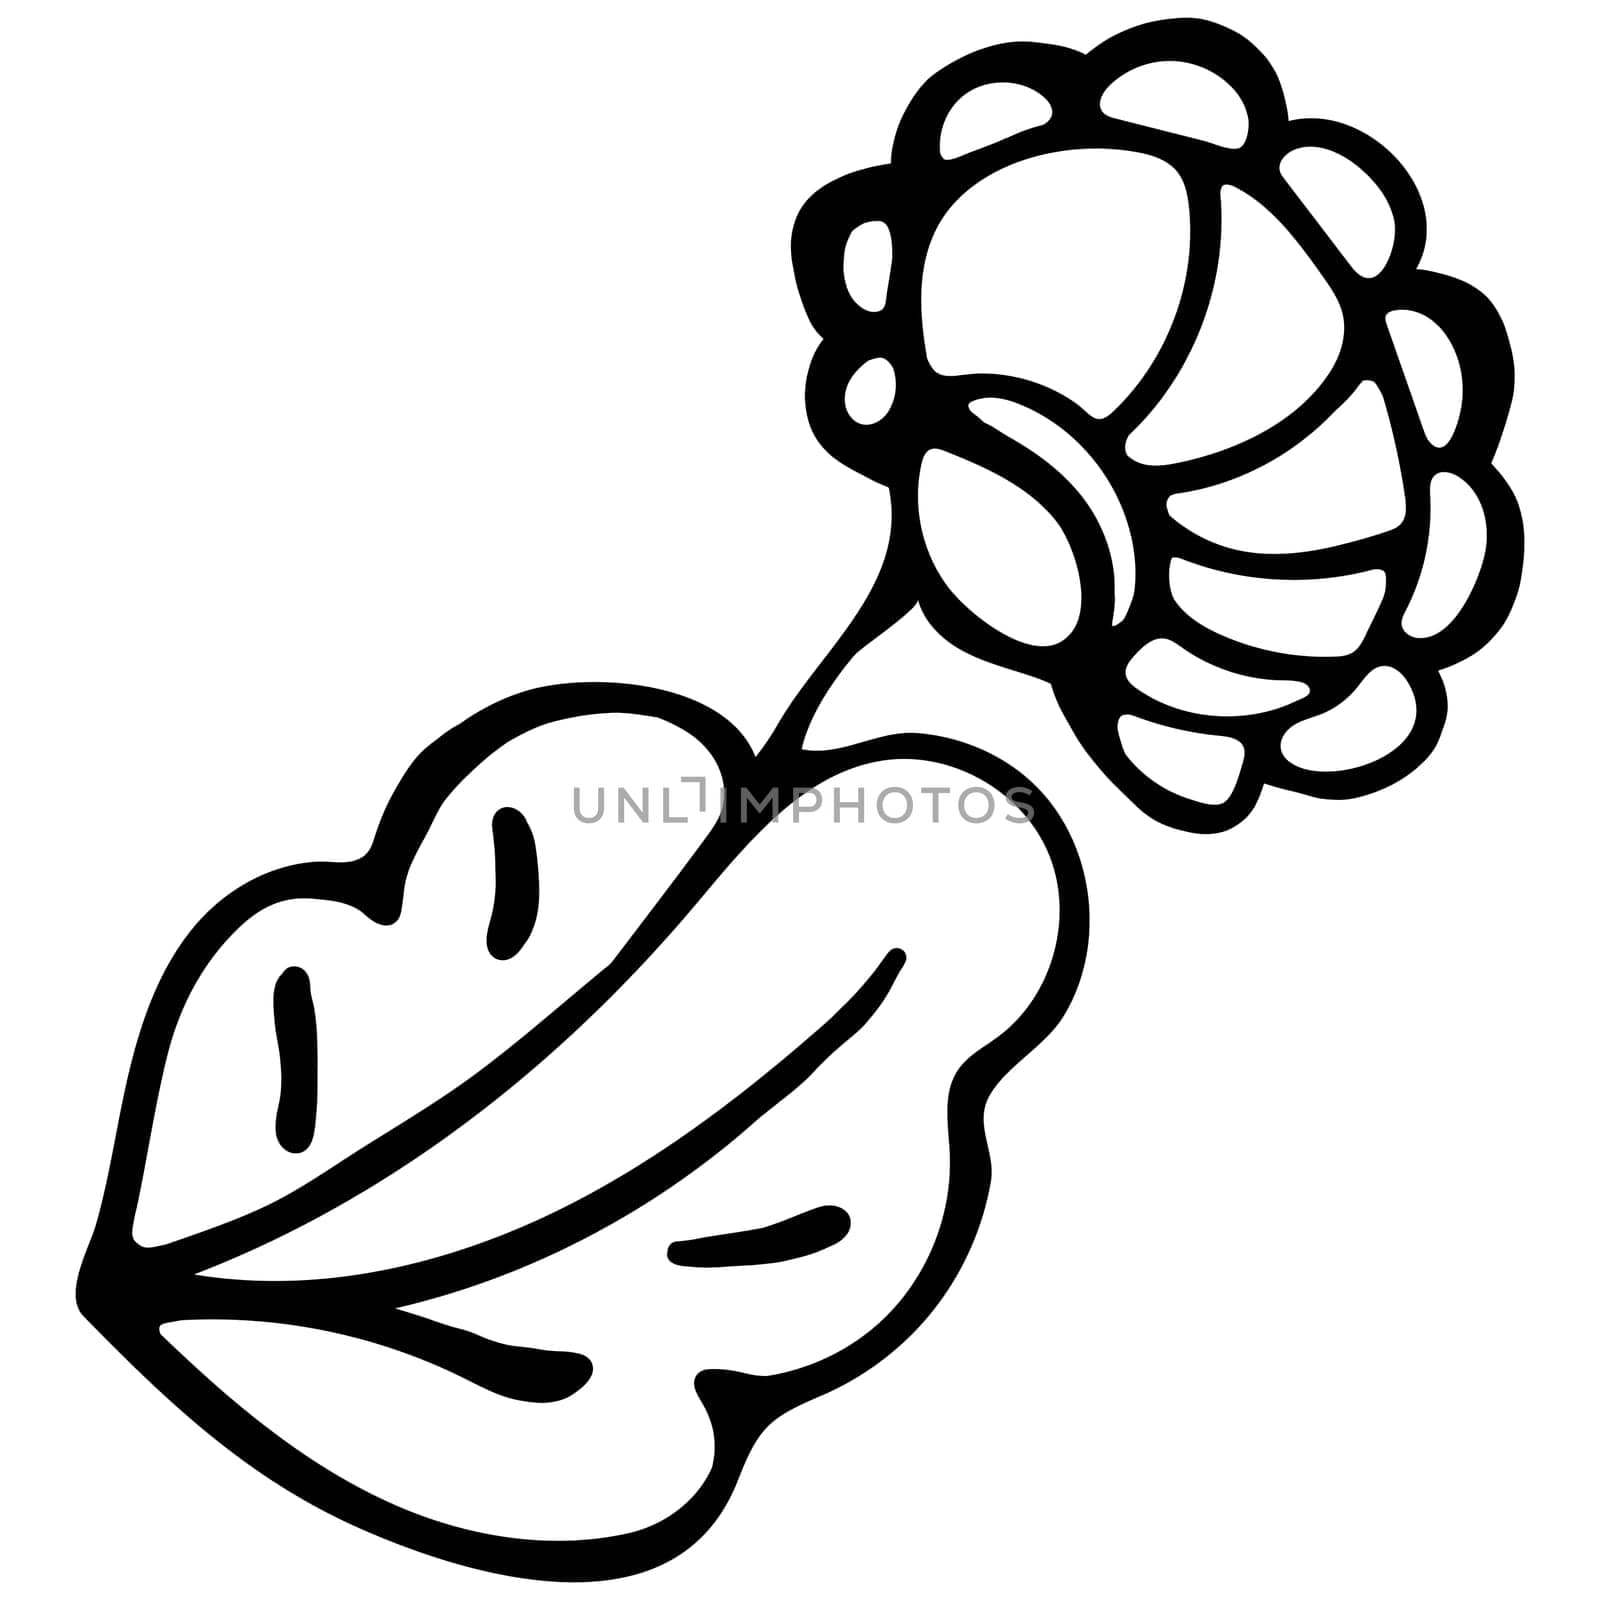 Flower Icon. Hand Drawn Simple Black Outline Floral Illustration. Clip Art in Doodle Style Isolated on White Background. Flat Flower Illustration for Coloring Page, Coloring Book or Sheet for Kids.